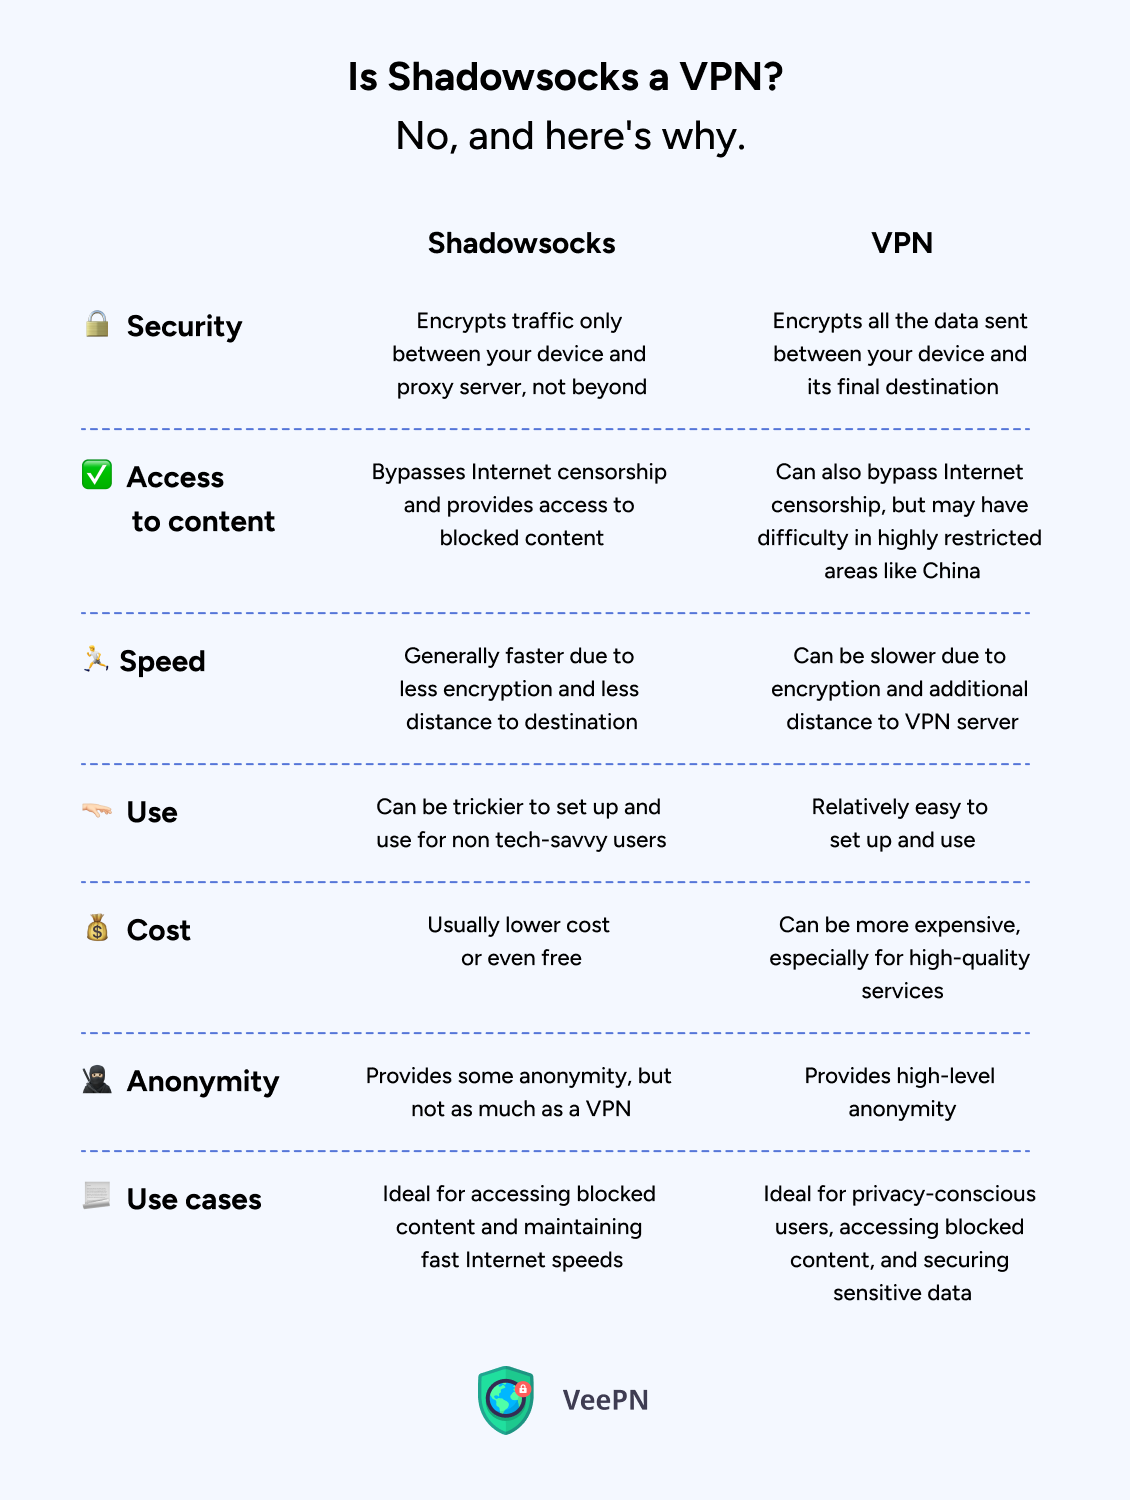 Is Shadowsocks a VPN? No, and here's why: Comparison table of Shadowsocks and VPN